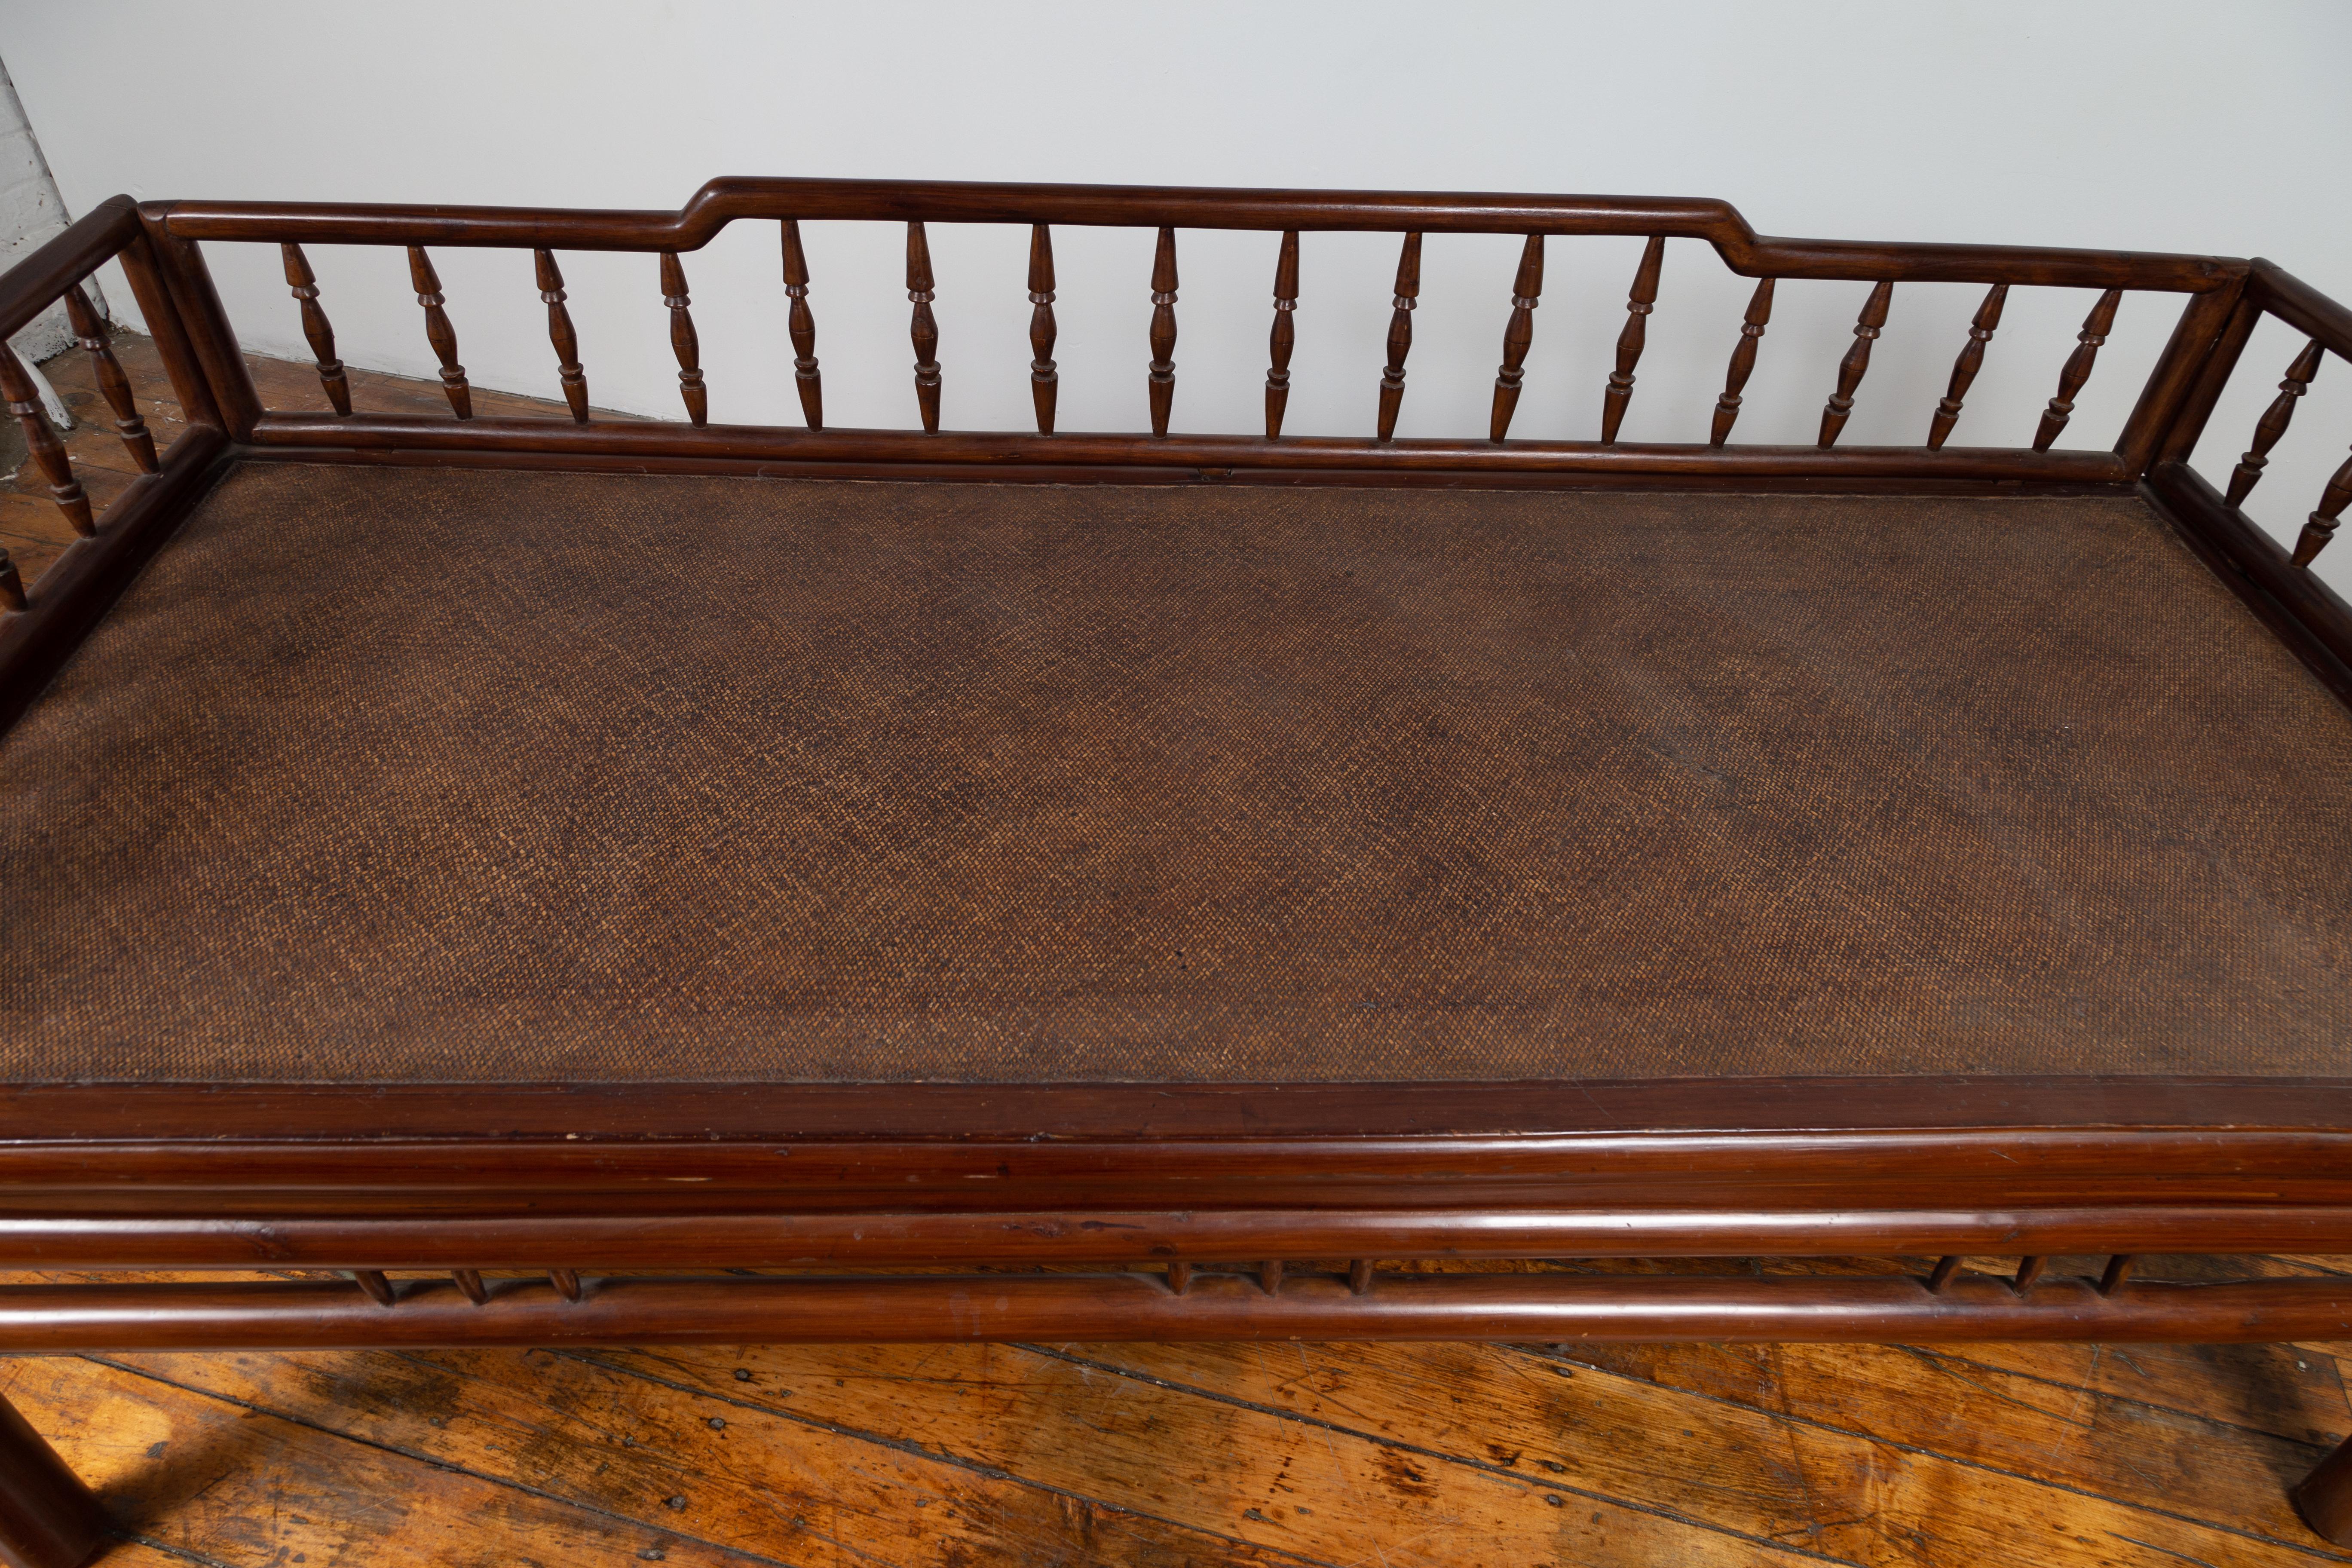 20th Century Chinese Antique Wooden Daybed with Woven Rattan Seat and Spindle Accents